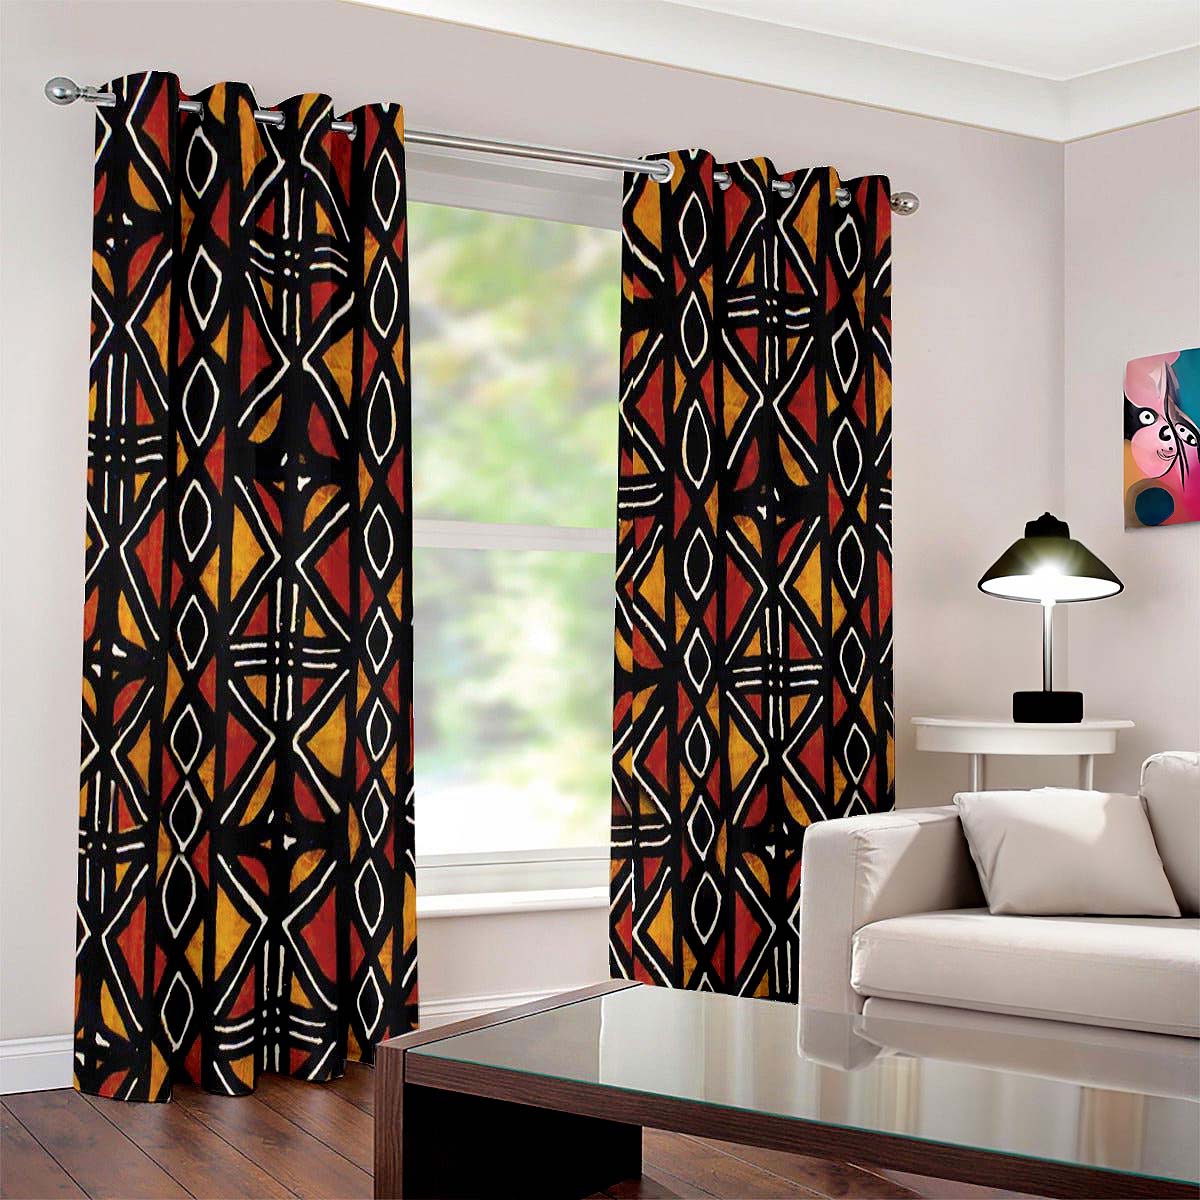 African Print Curtains Blackout in Mud Cloth Grommet Pattern